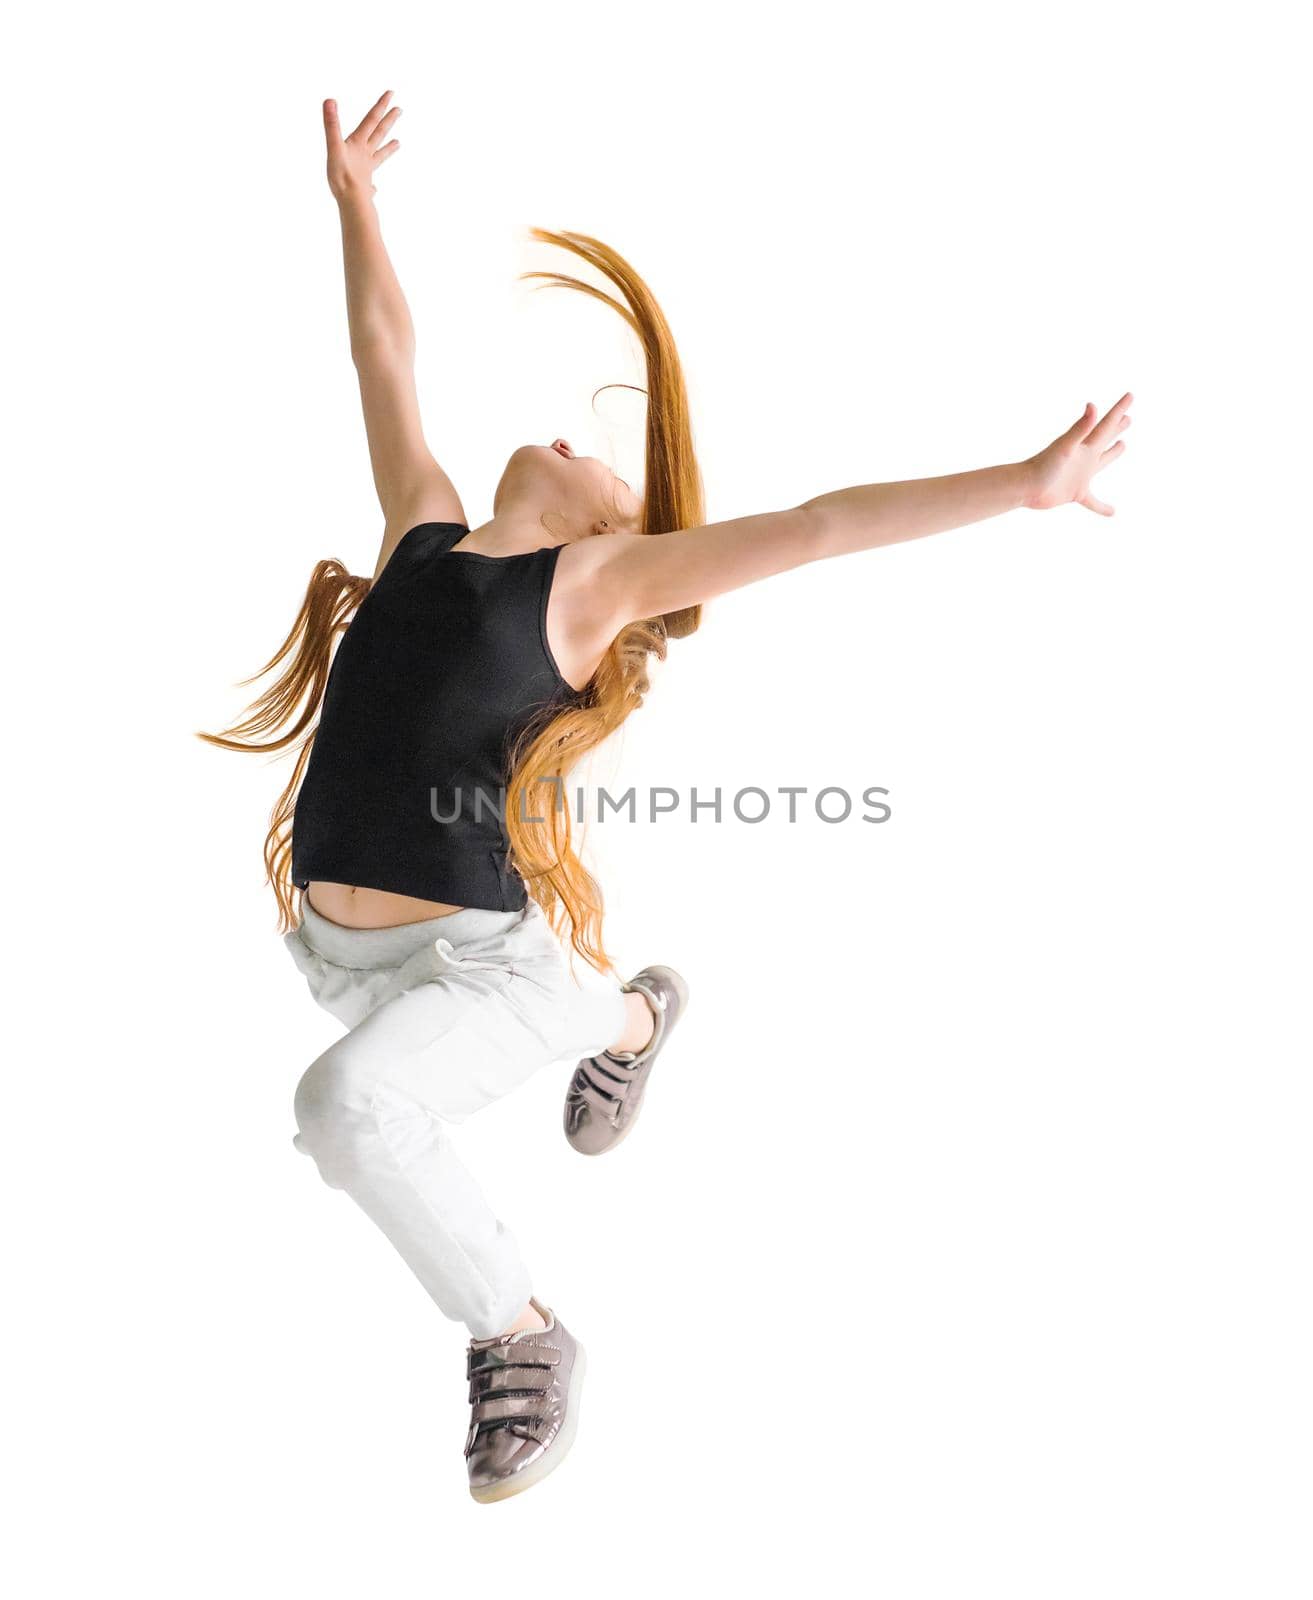 Excited young girl leaping in the air with her hands raised. Sport, training, dancing lifestyle.